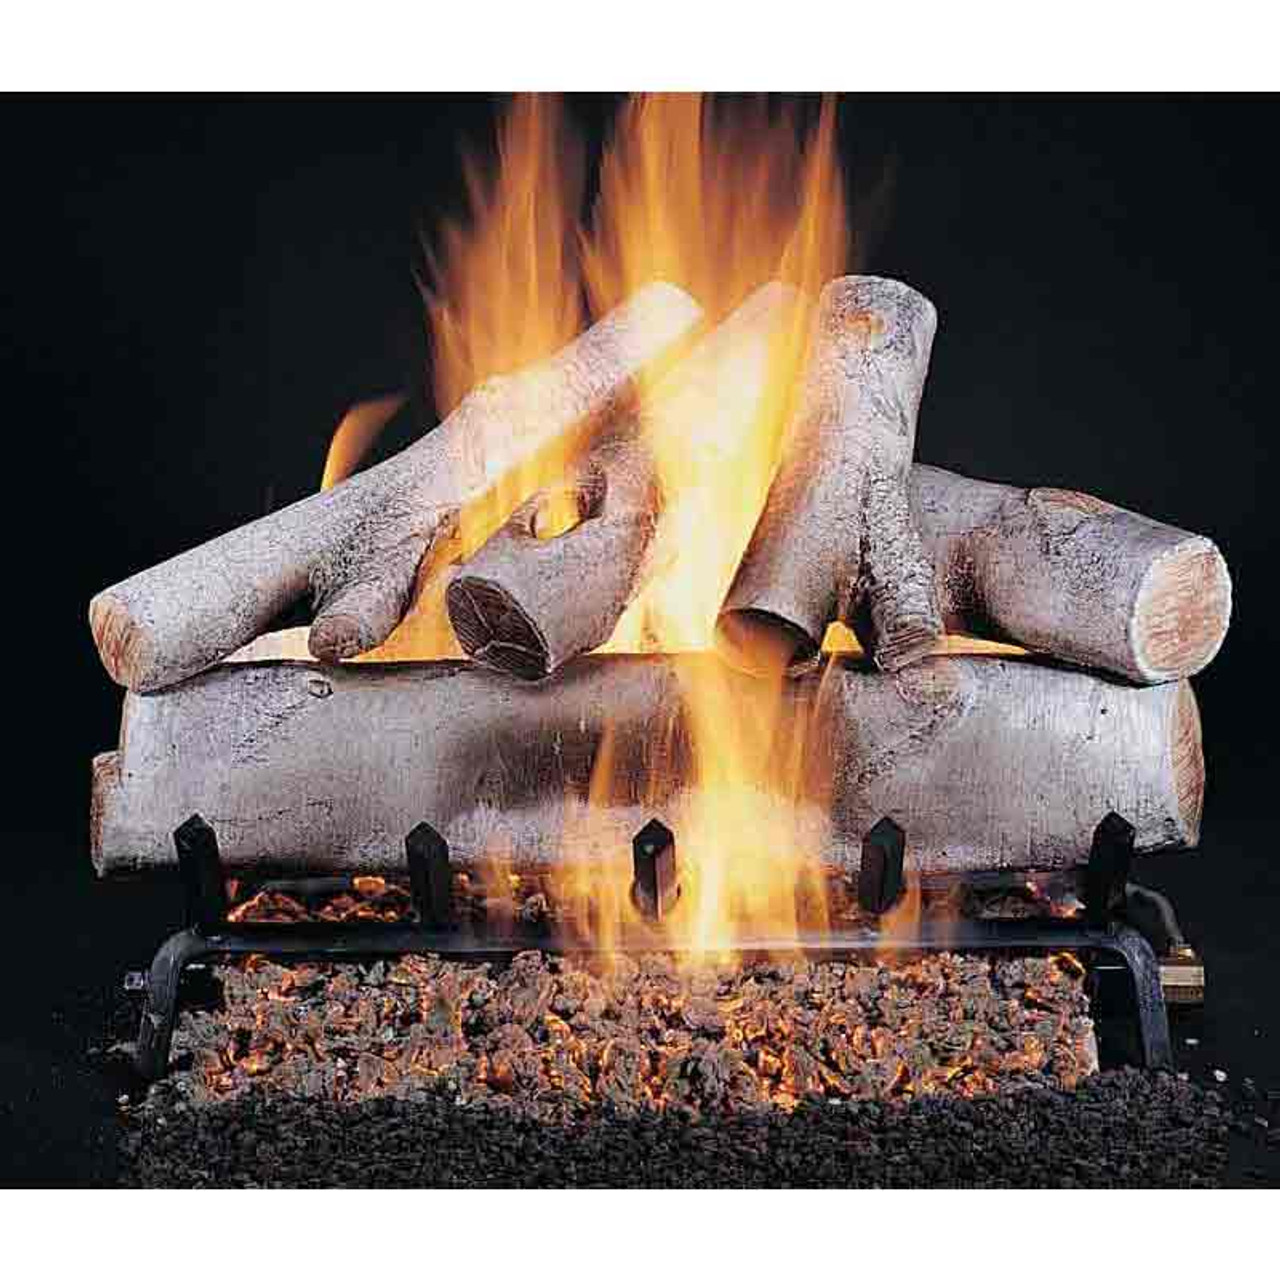 How to Make Firebricks (fire logs) and Wood Stove Logs for Free